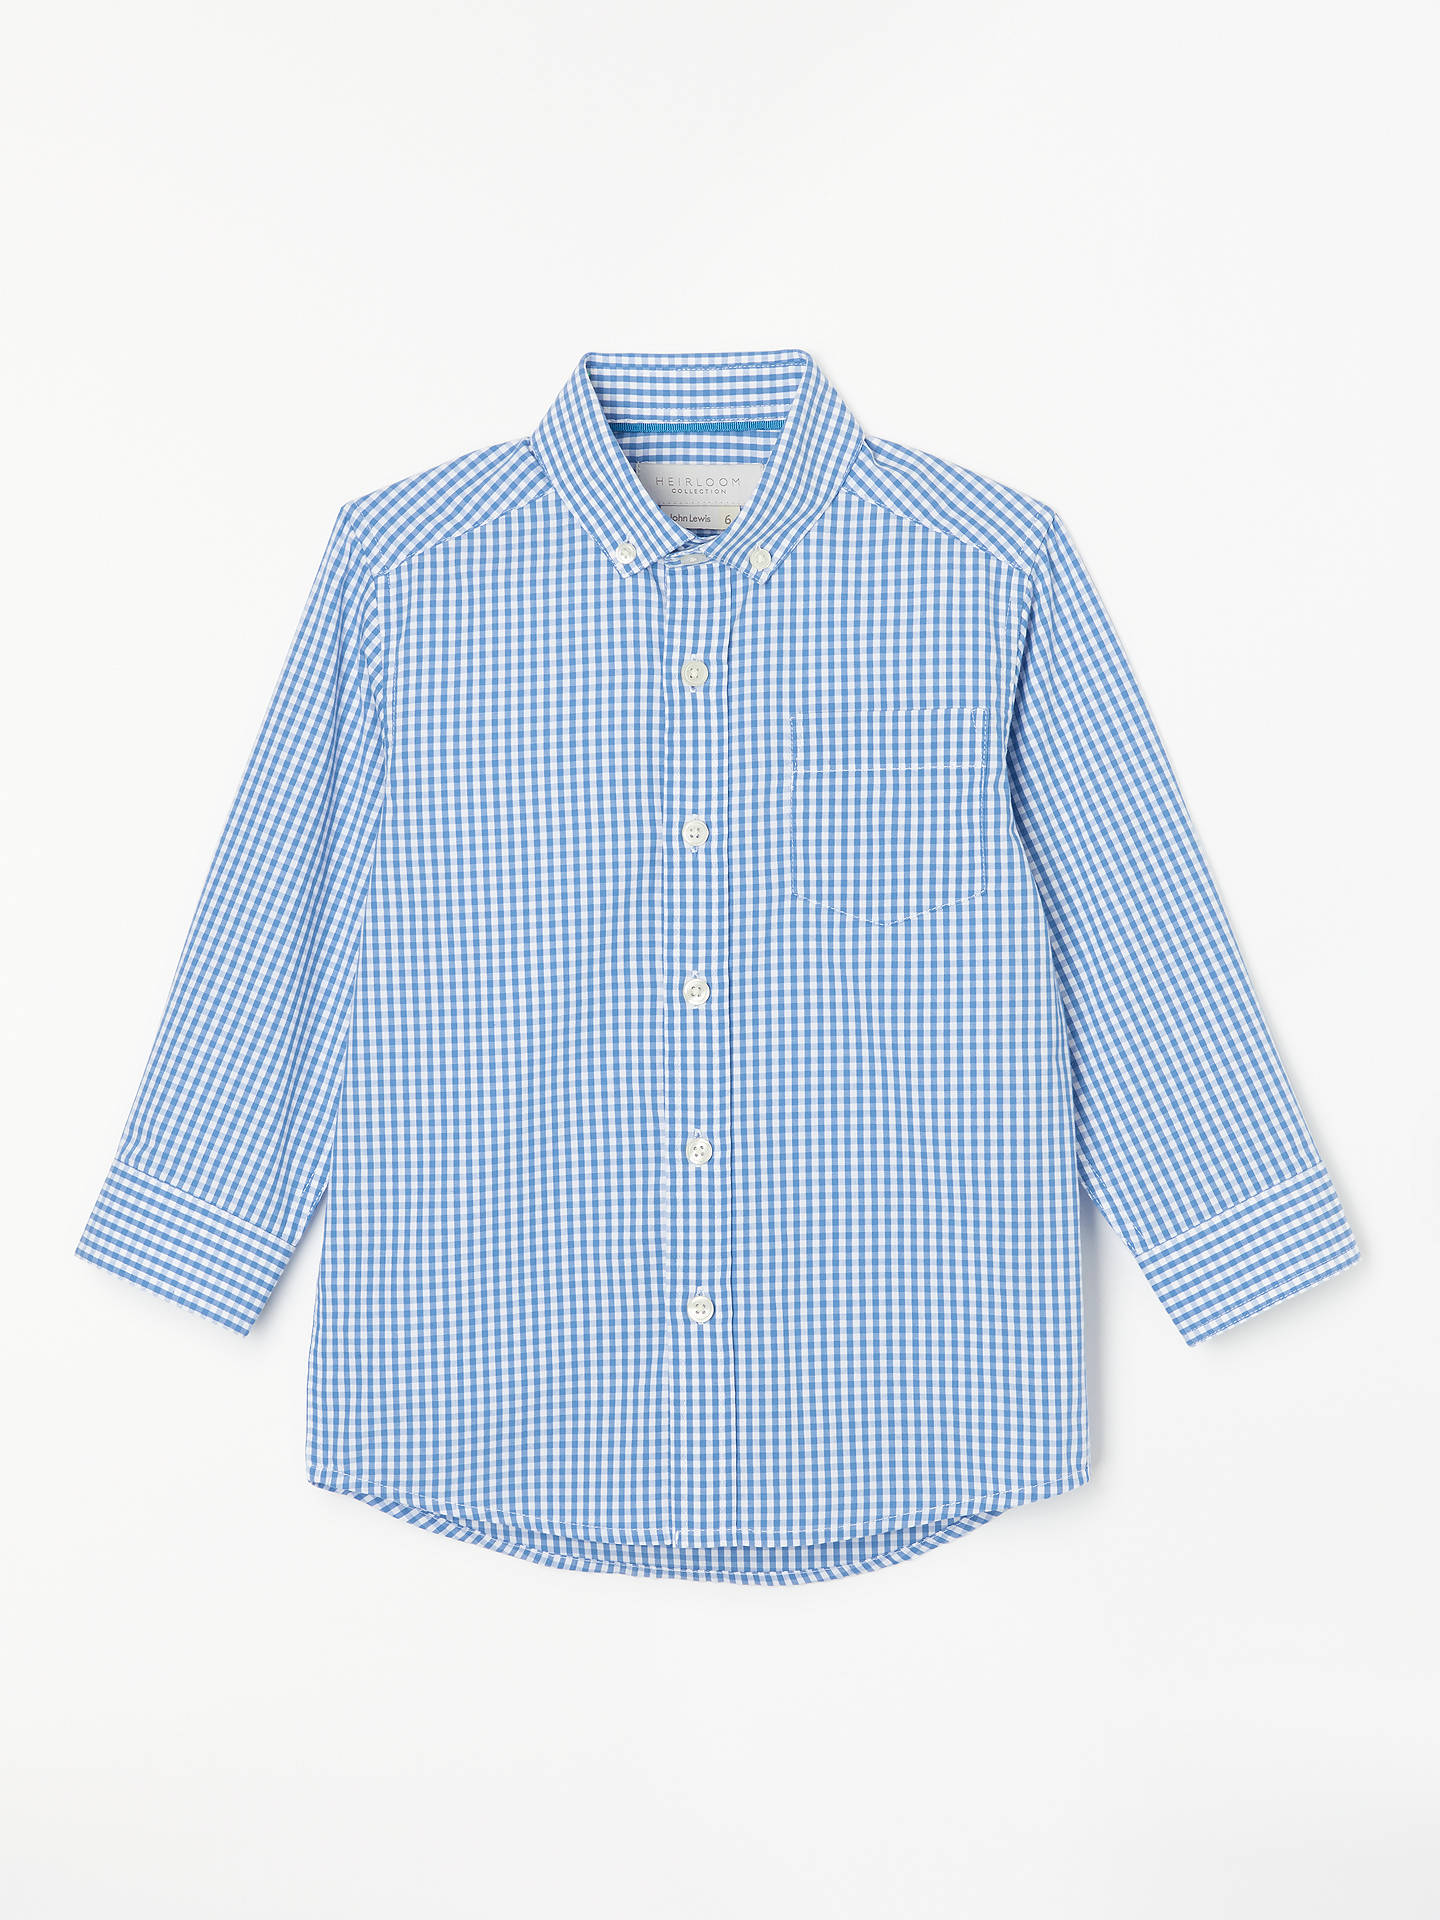 John Lewis & Partners Heirloom Collection Boys' Gingham Shirt, Blue at ...